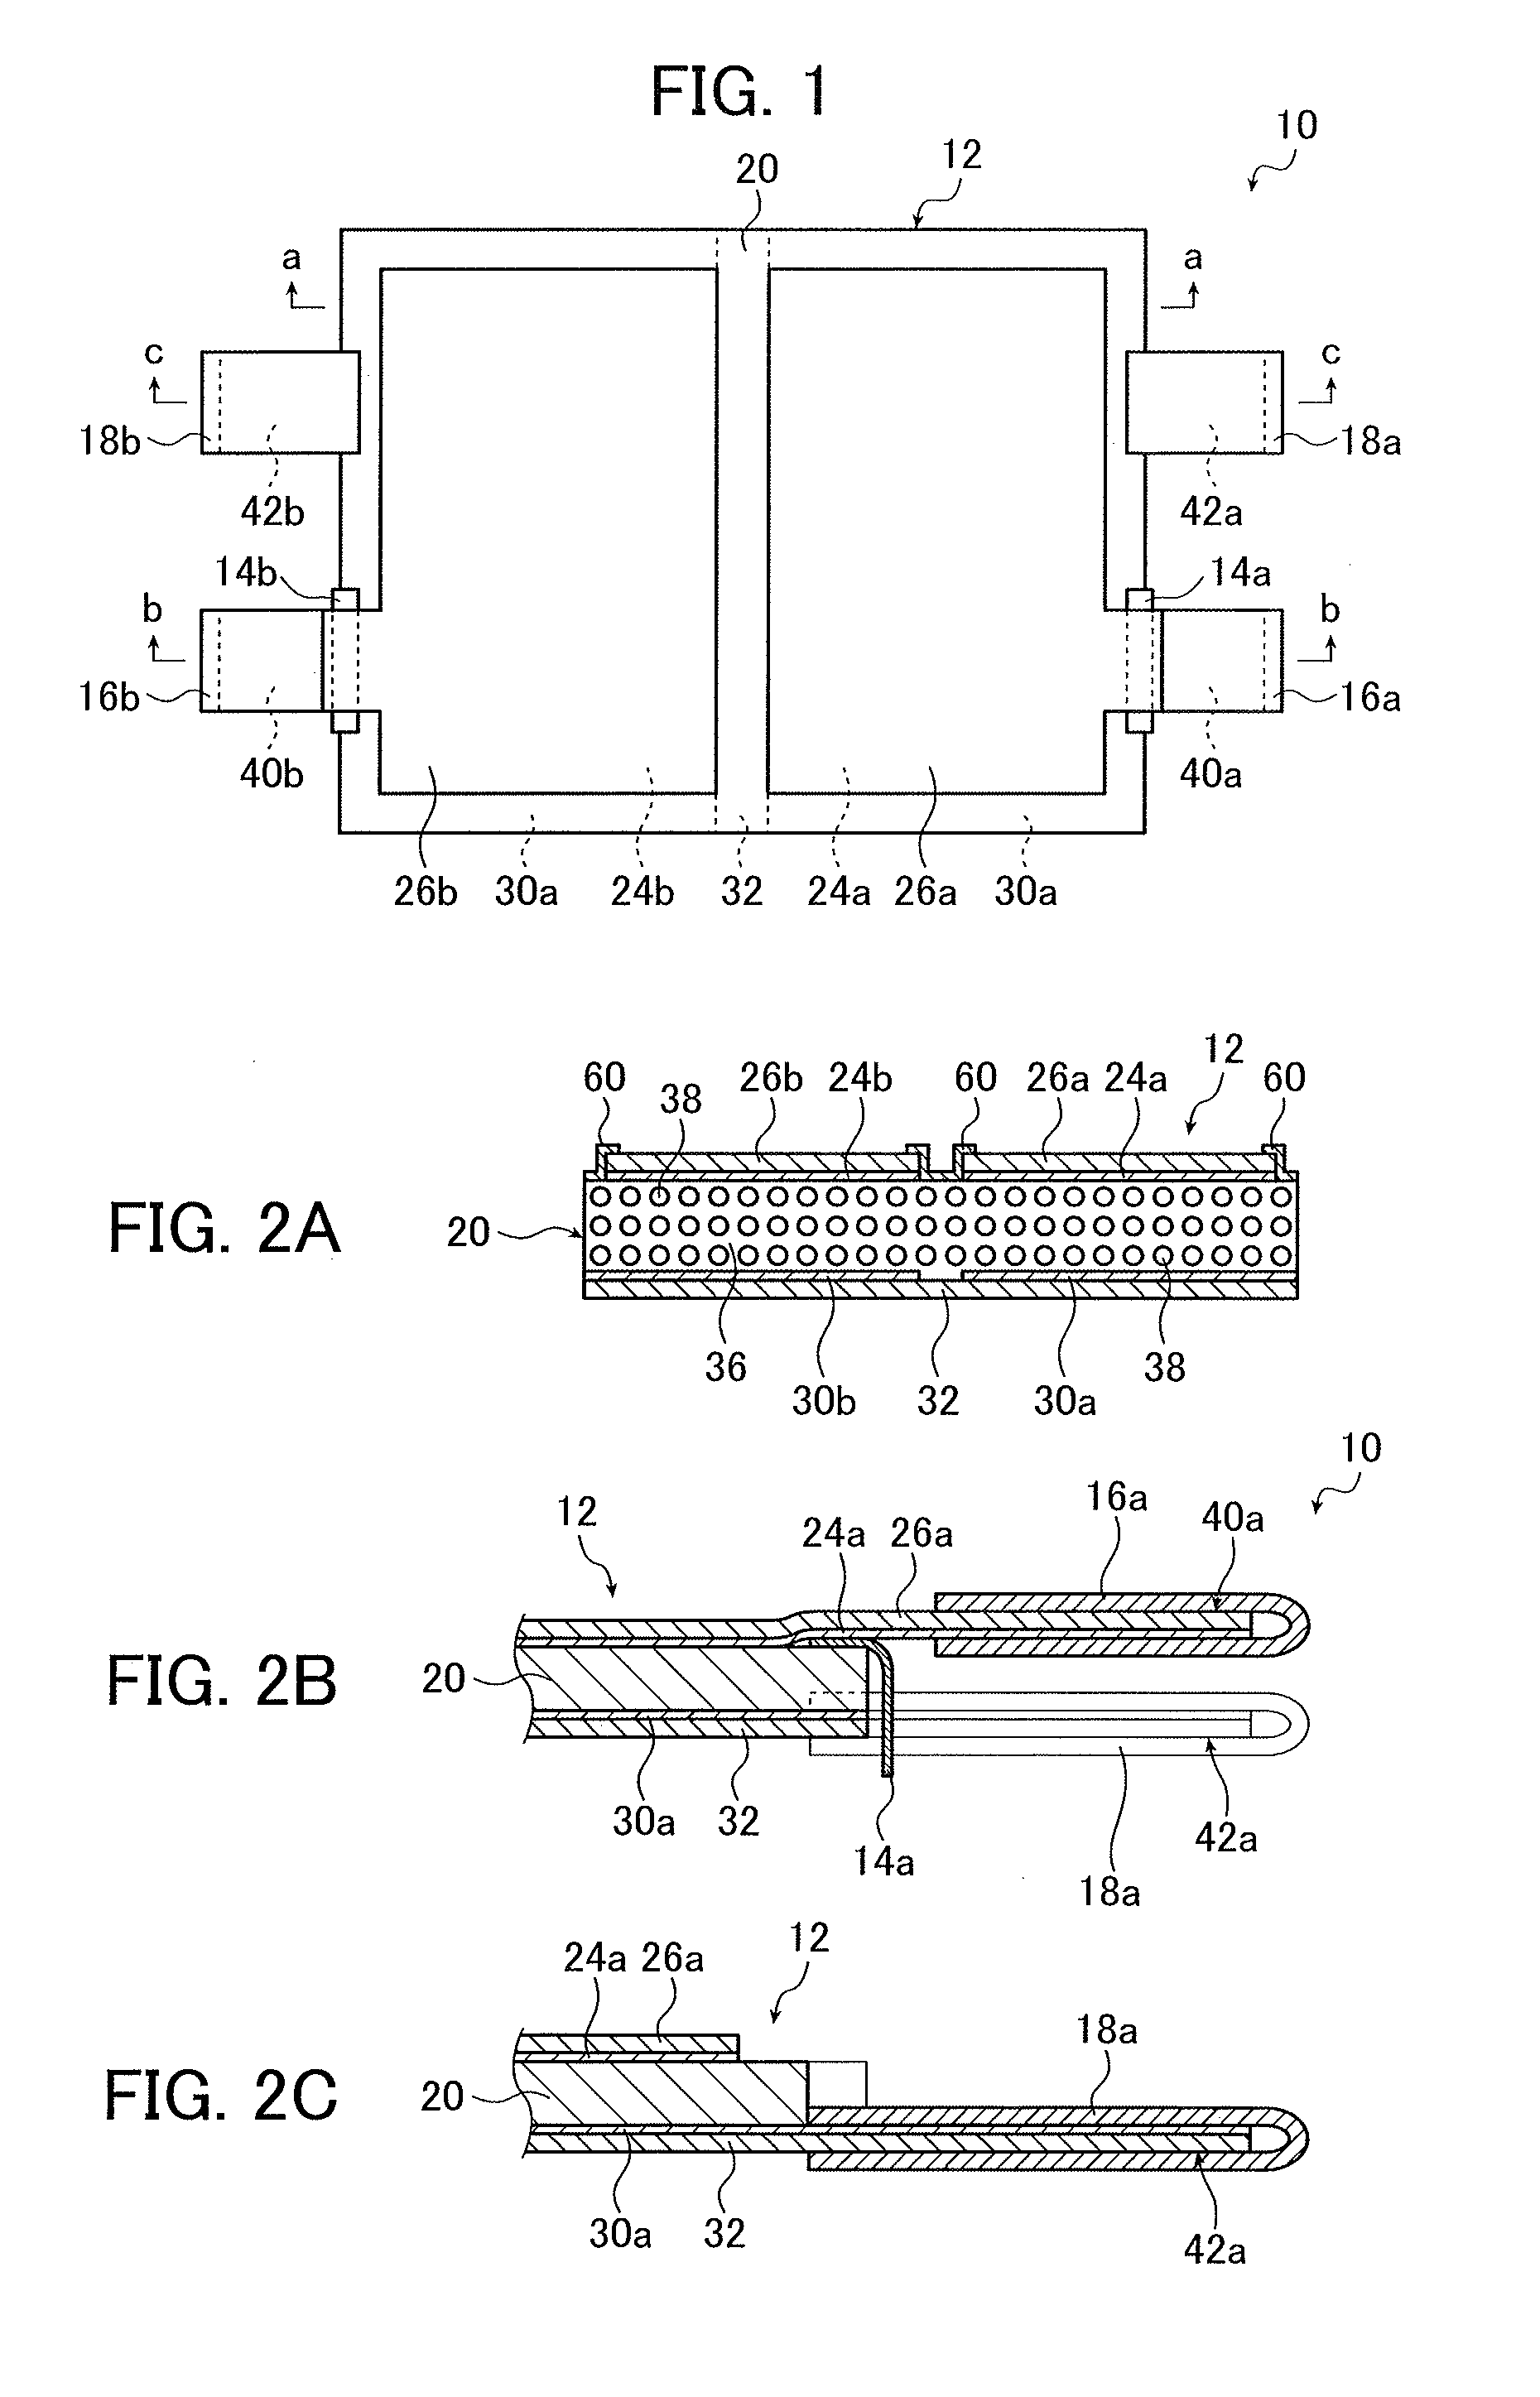 Electroacoustic conversion film, electroacoustic converter, flexible display, and projector screen